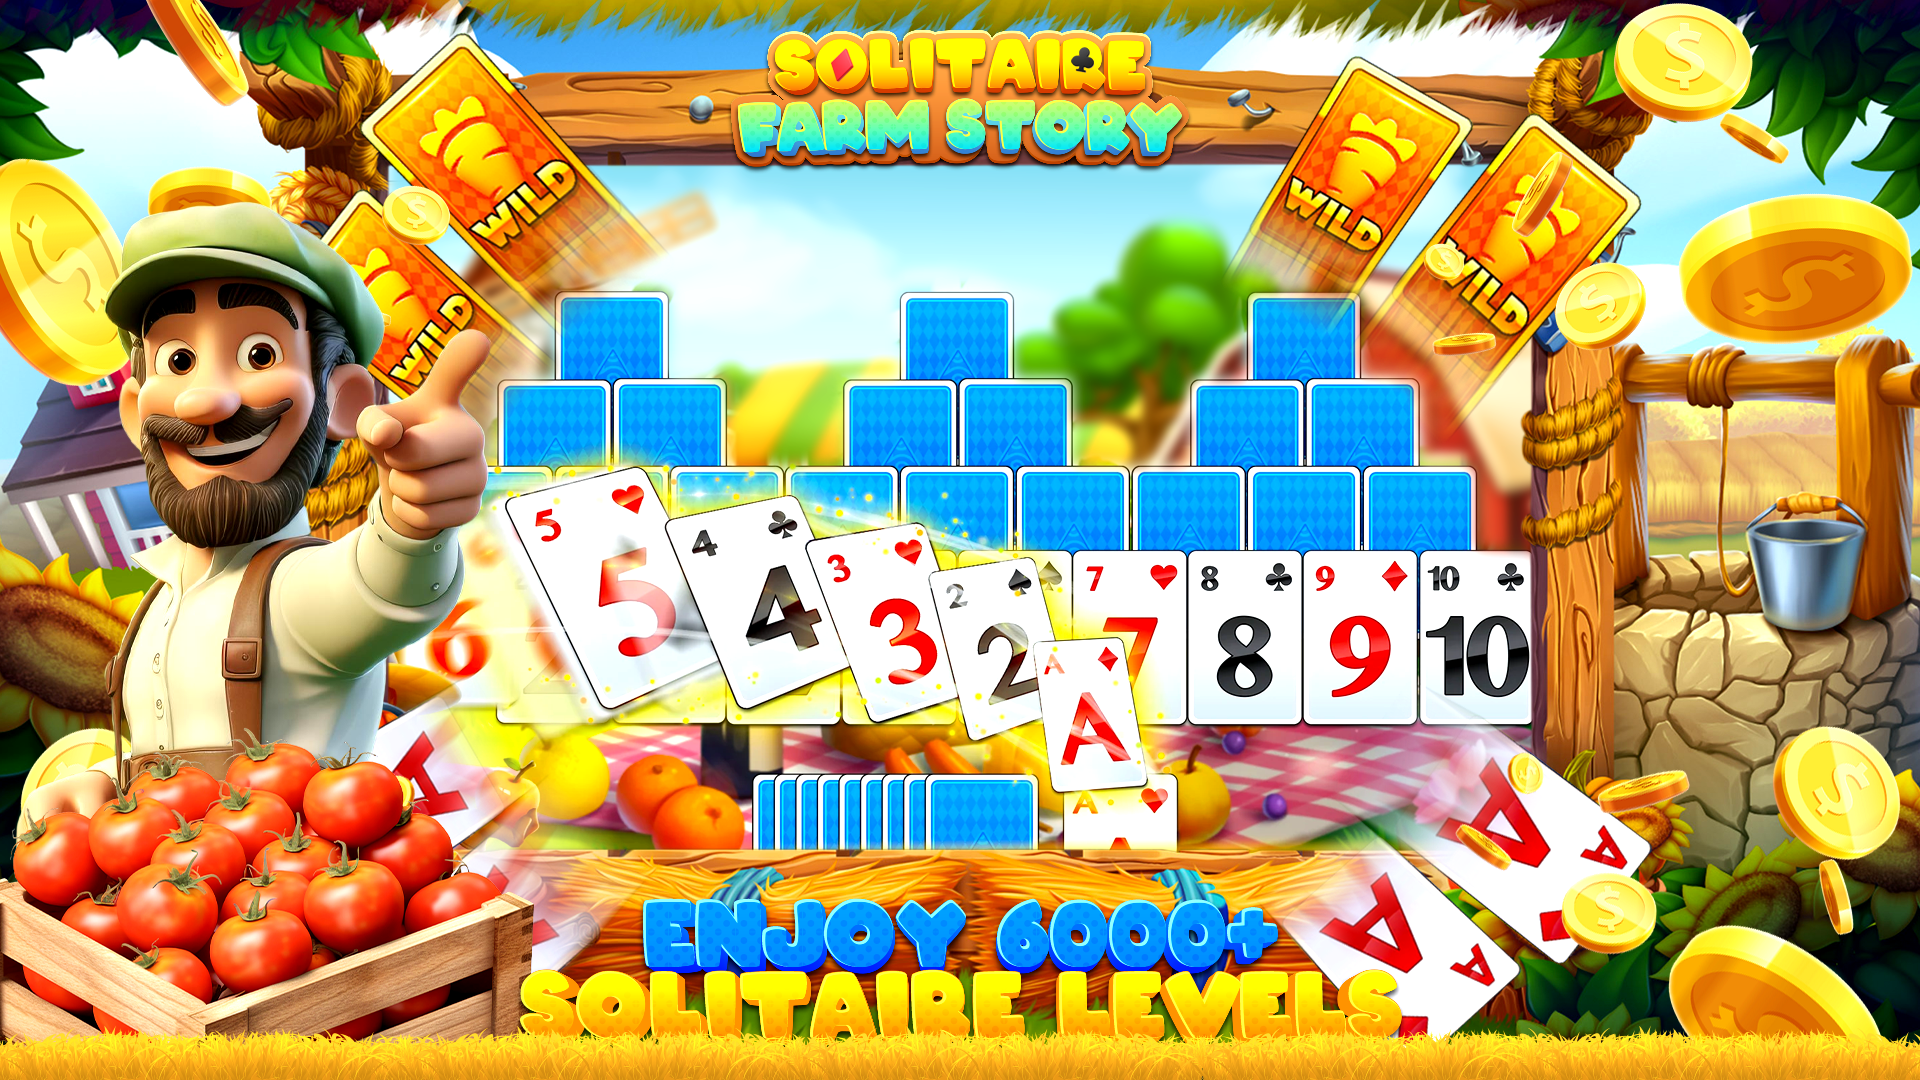 Solitaire Card Game Farm Story遊戲截圖